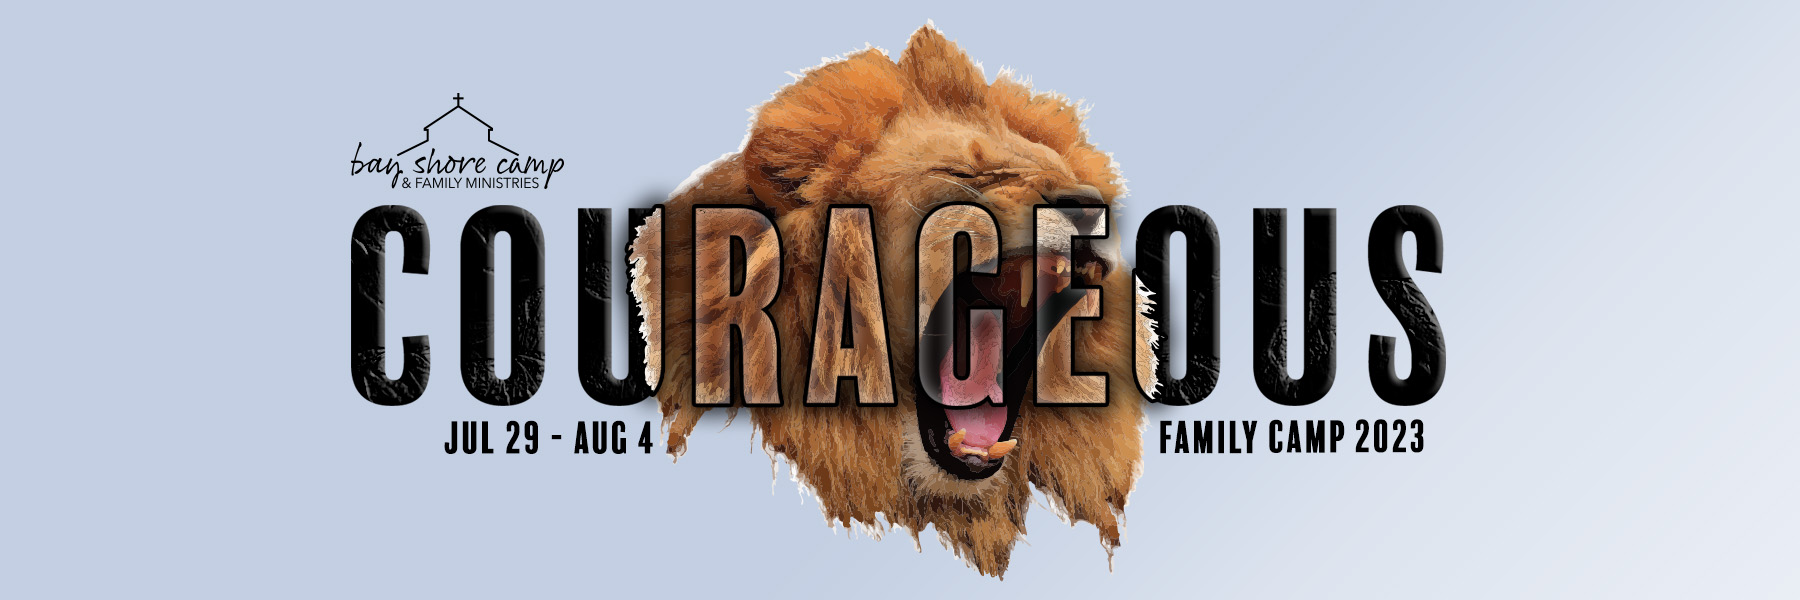 Family Camp 2023 - Courageous